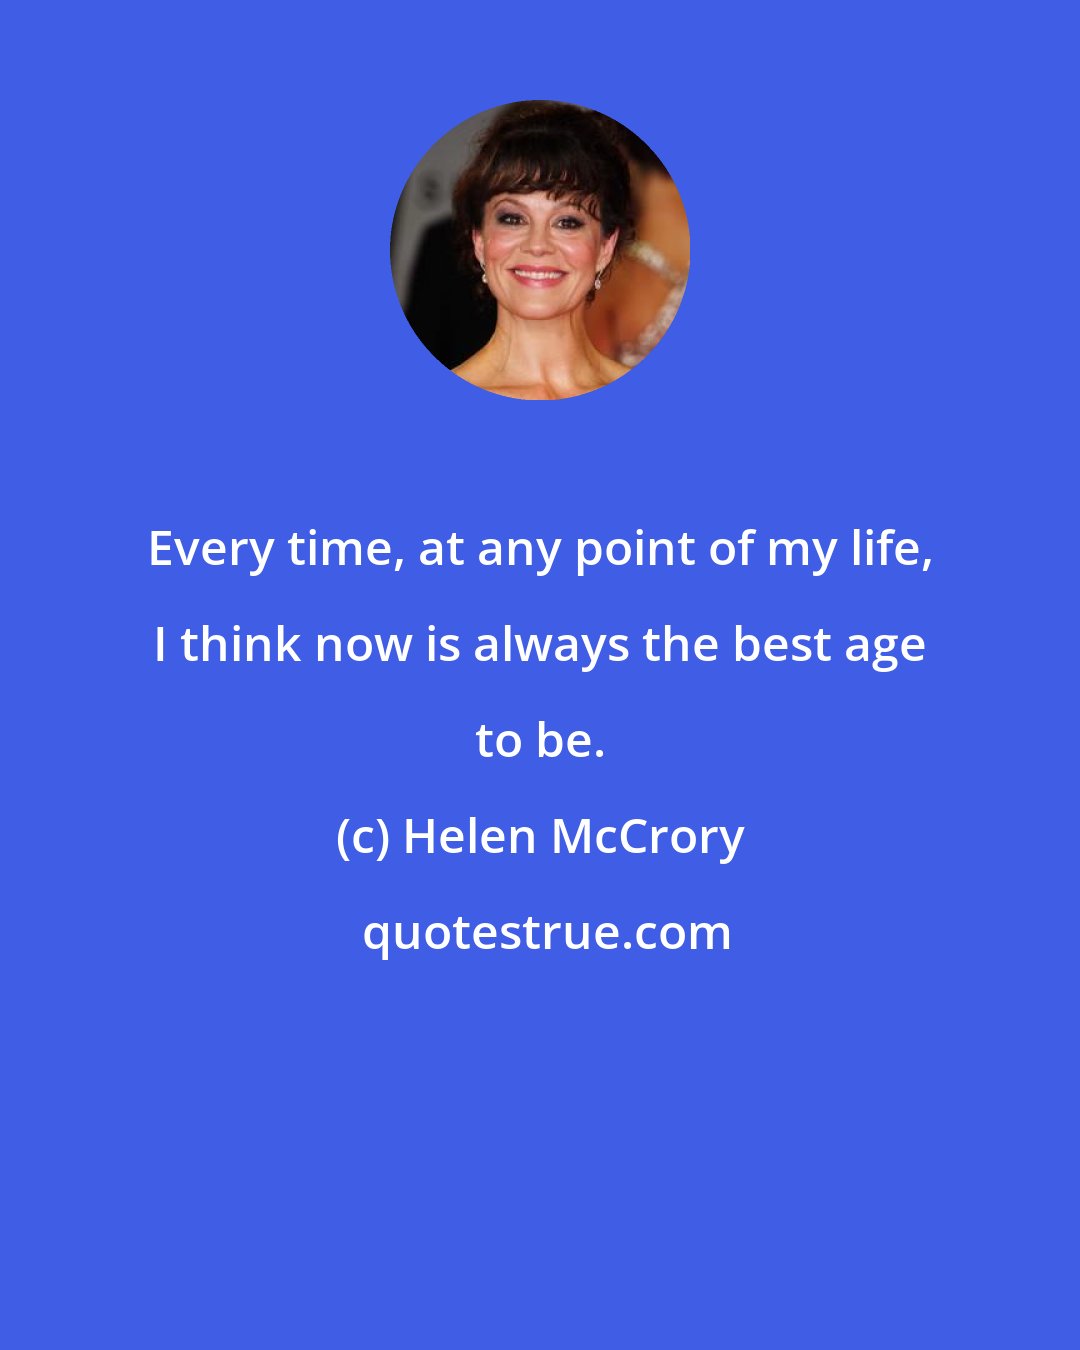 Helen McCrory: Every time, at any point of my life, I think now is always the best age to be.